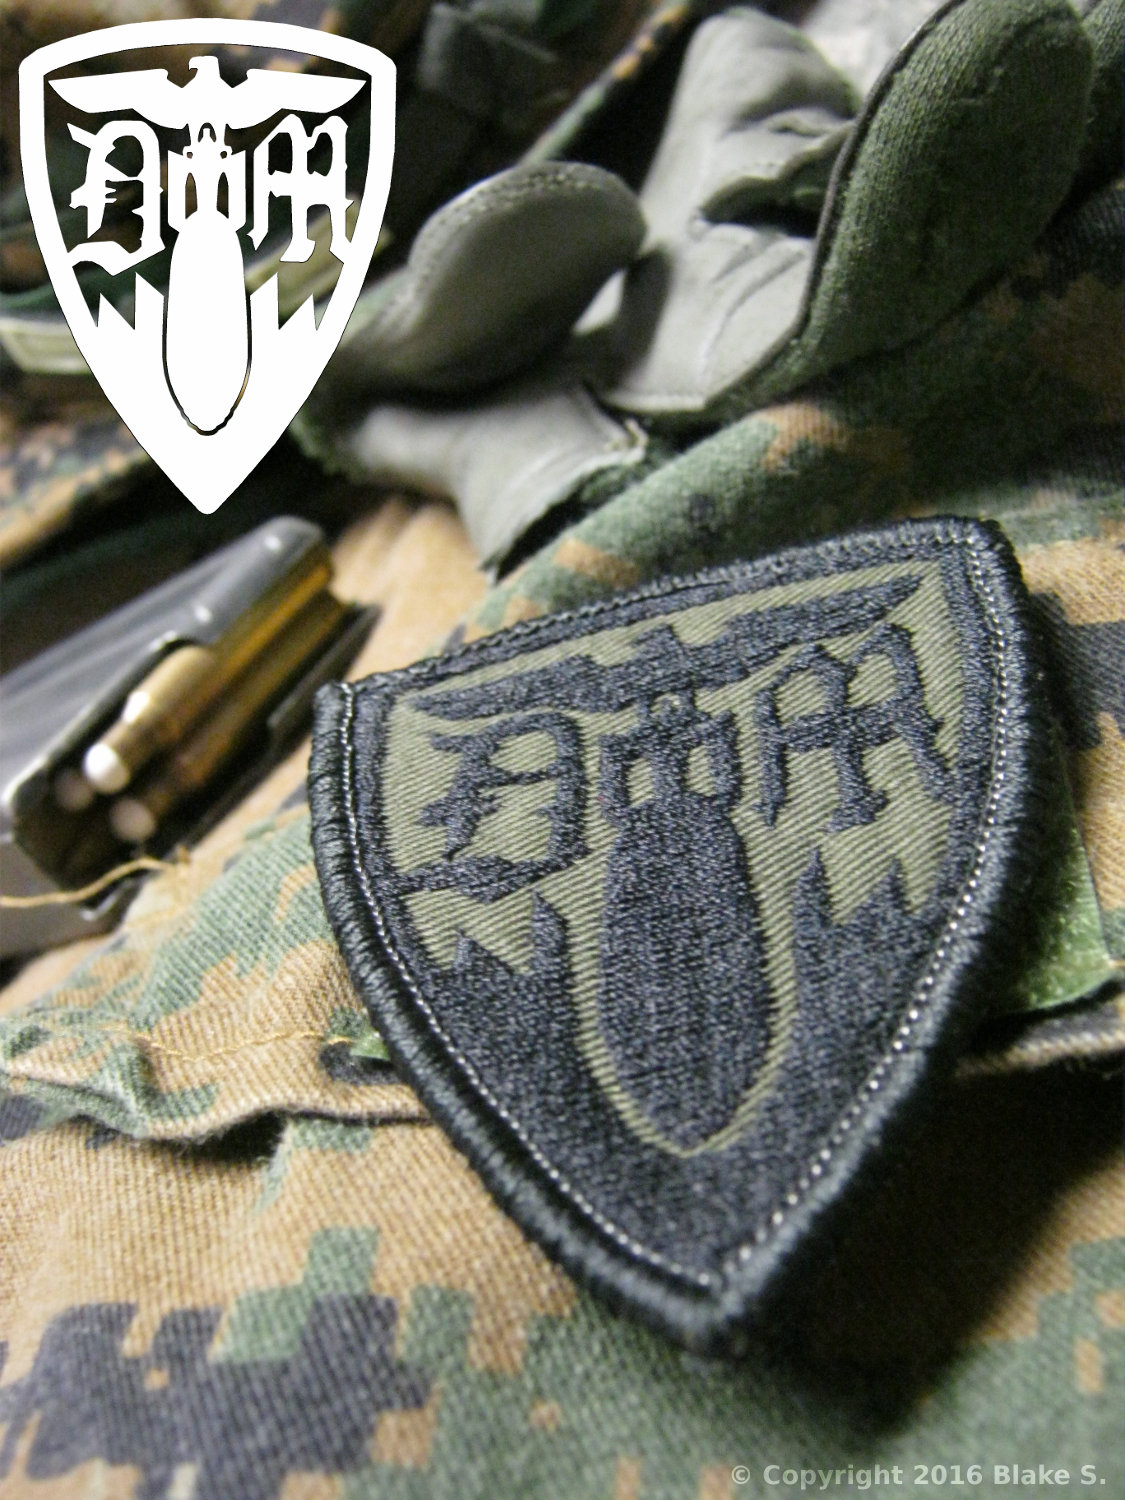 Doom squad logo by Omnitac. Shown in olive drab as a patch attached to a uniform.